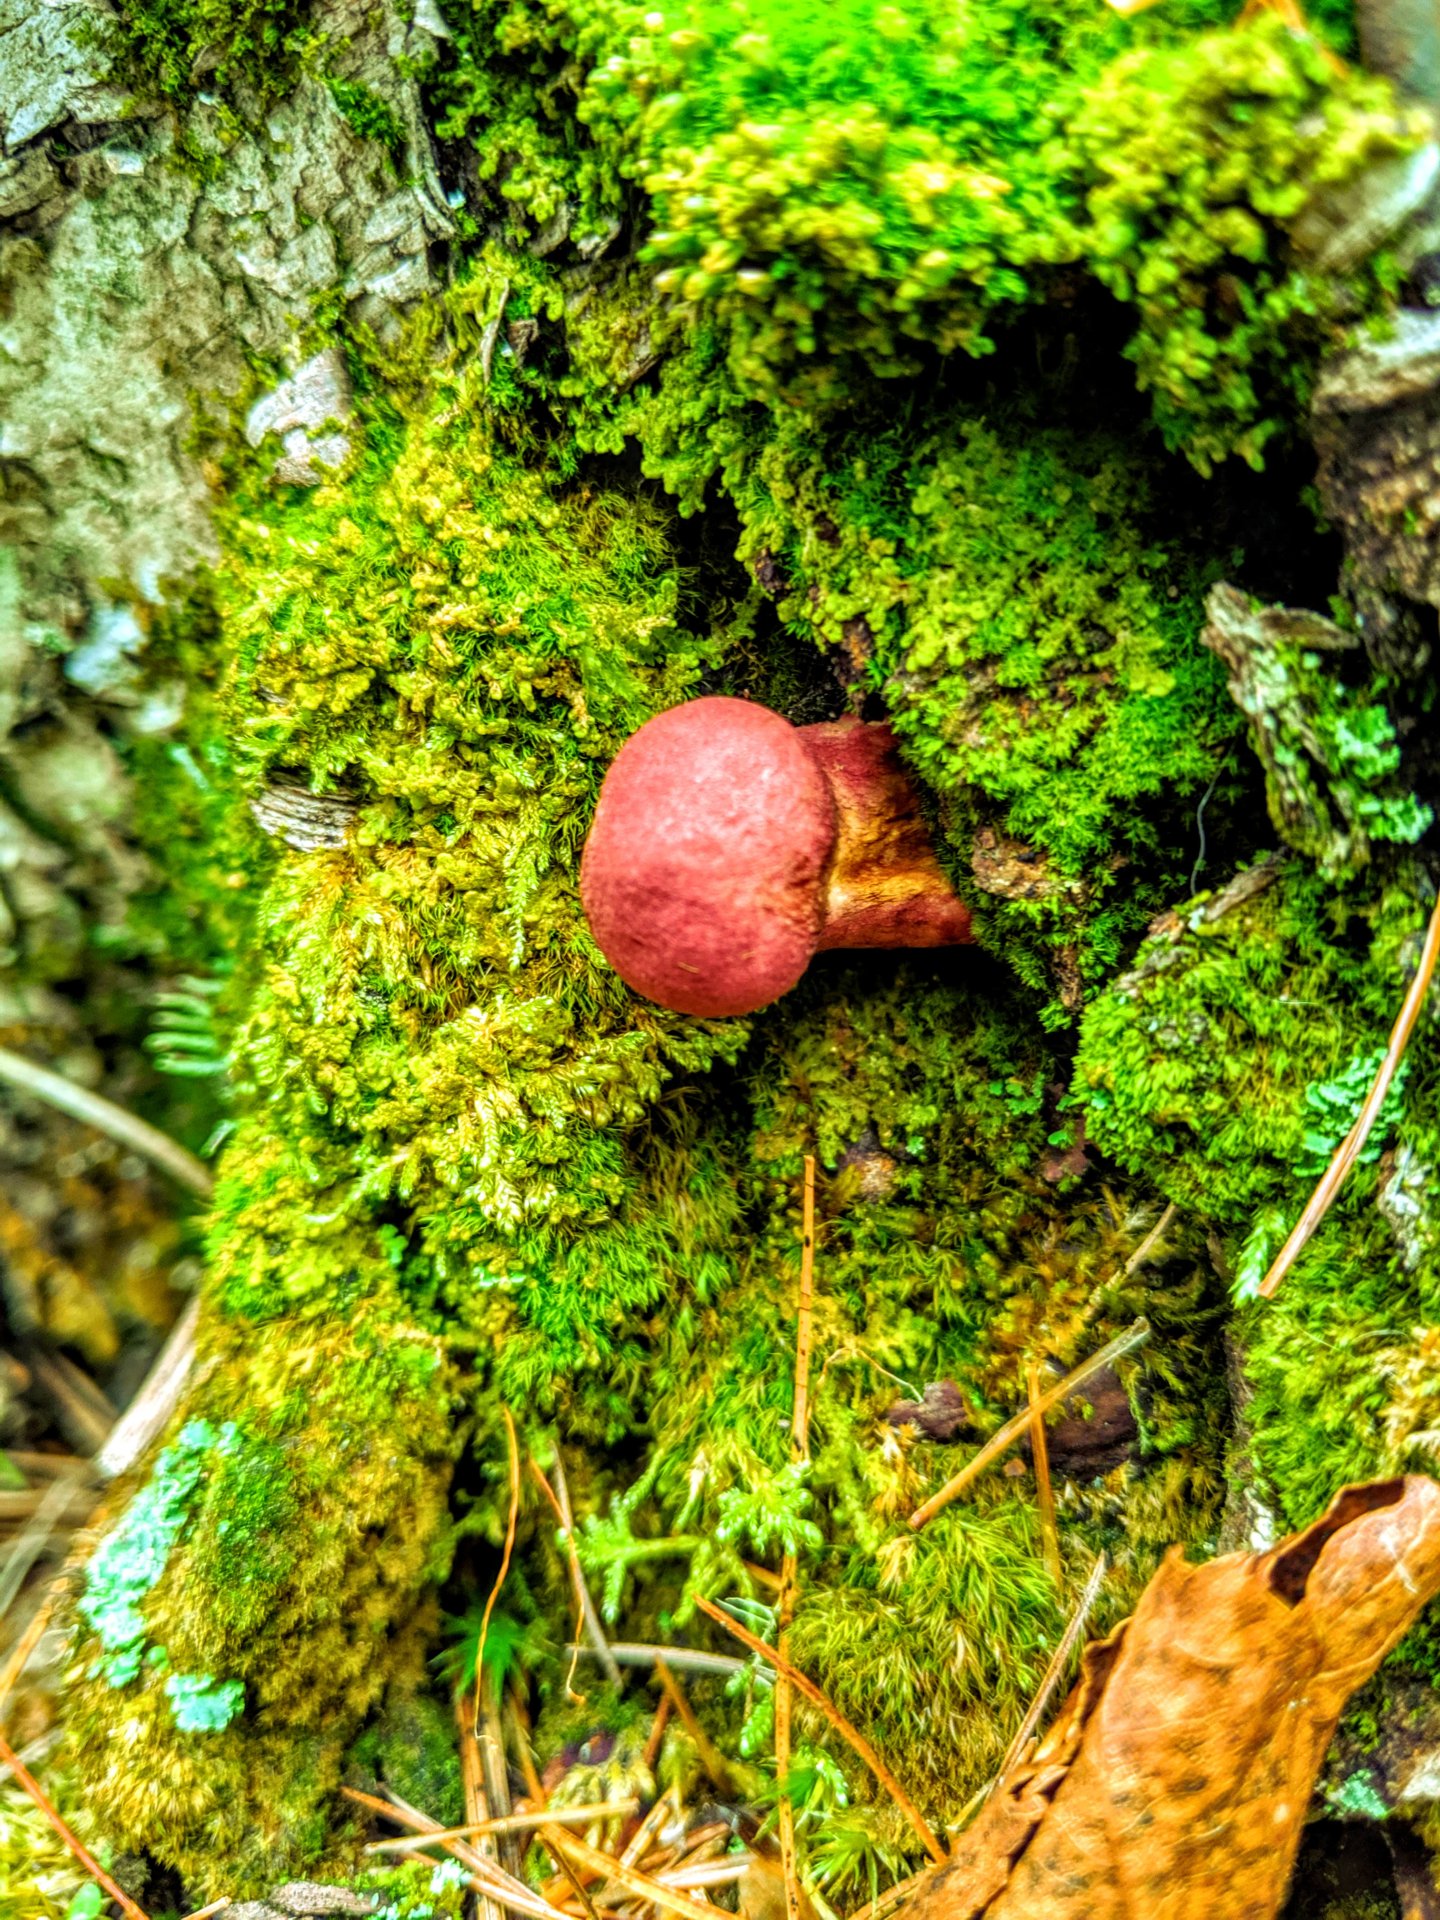 Mushroom on a tree with a bunch of green moss, in Downeast, Maine. 2019